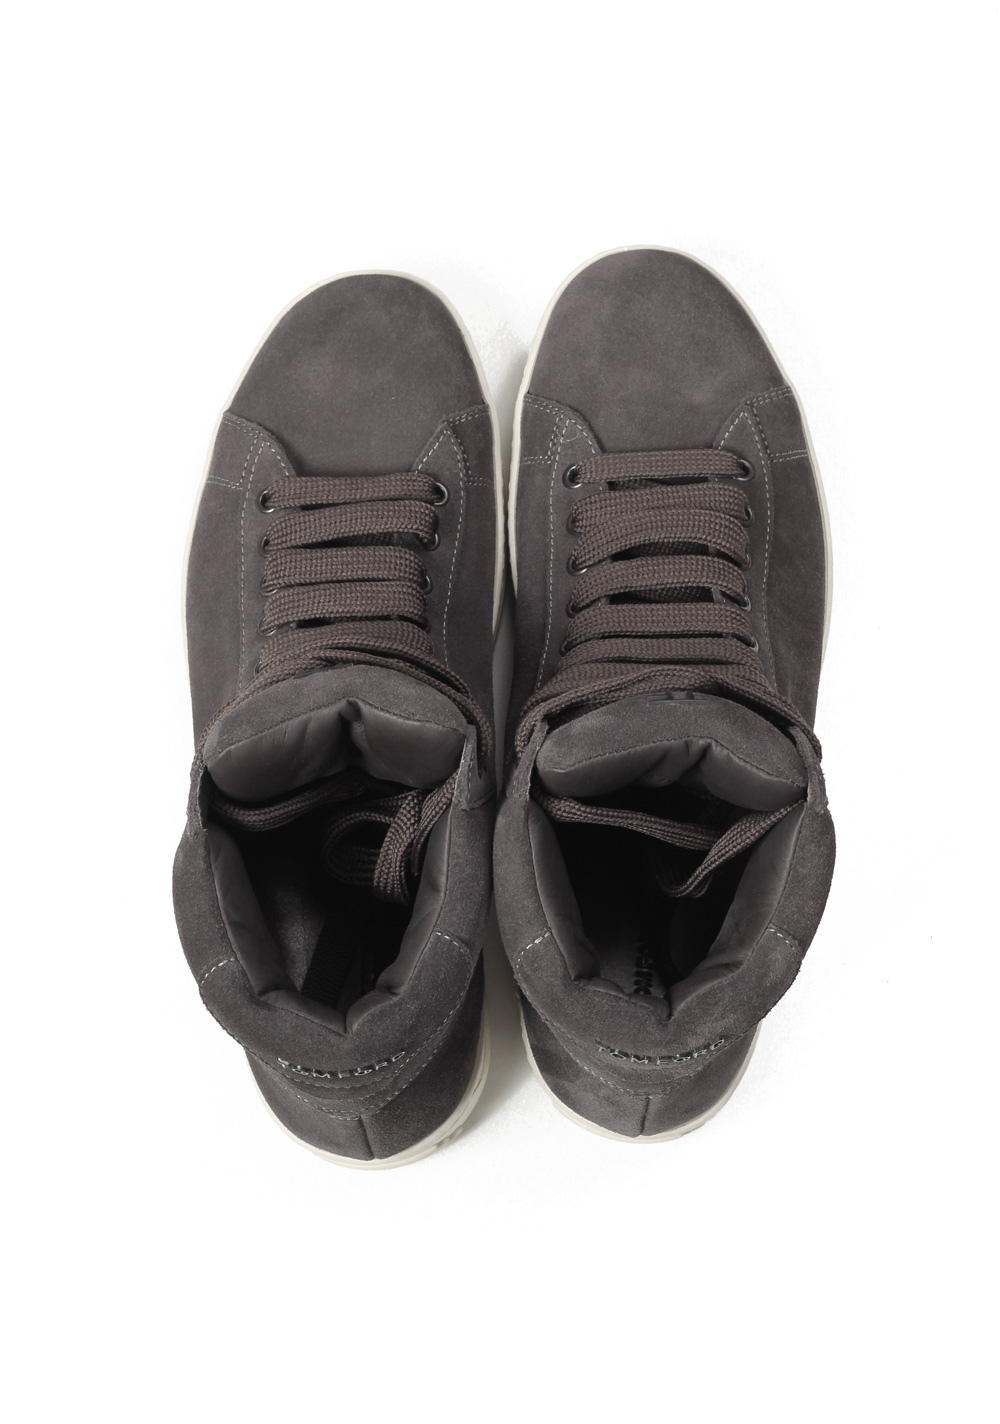 TOM FORD Russel High Top Gray Suede Sneaker Shoes Size 11 UK / 12 U.S. | Costume Limité